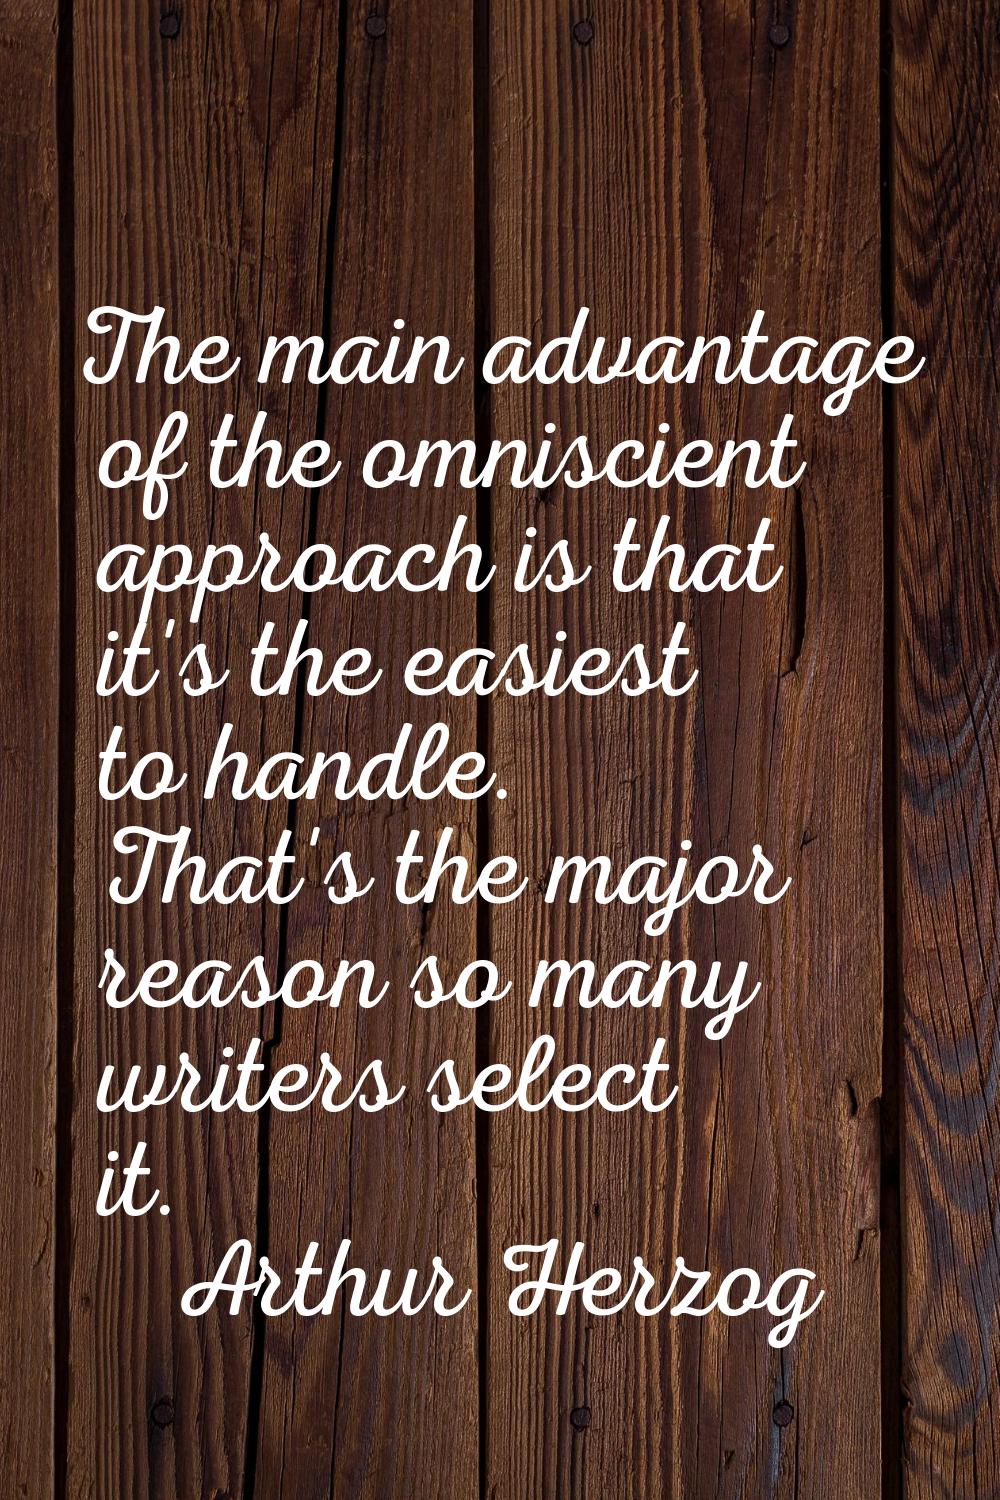 The main advantage of the omniscient approach is that it's the easiest to handle. That's the major 